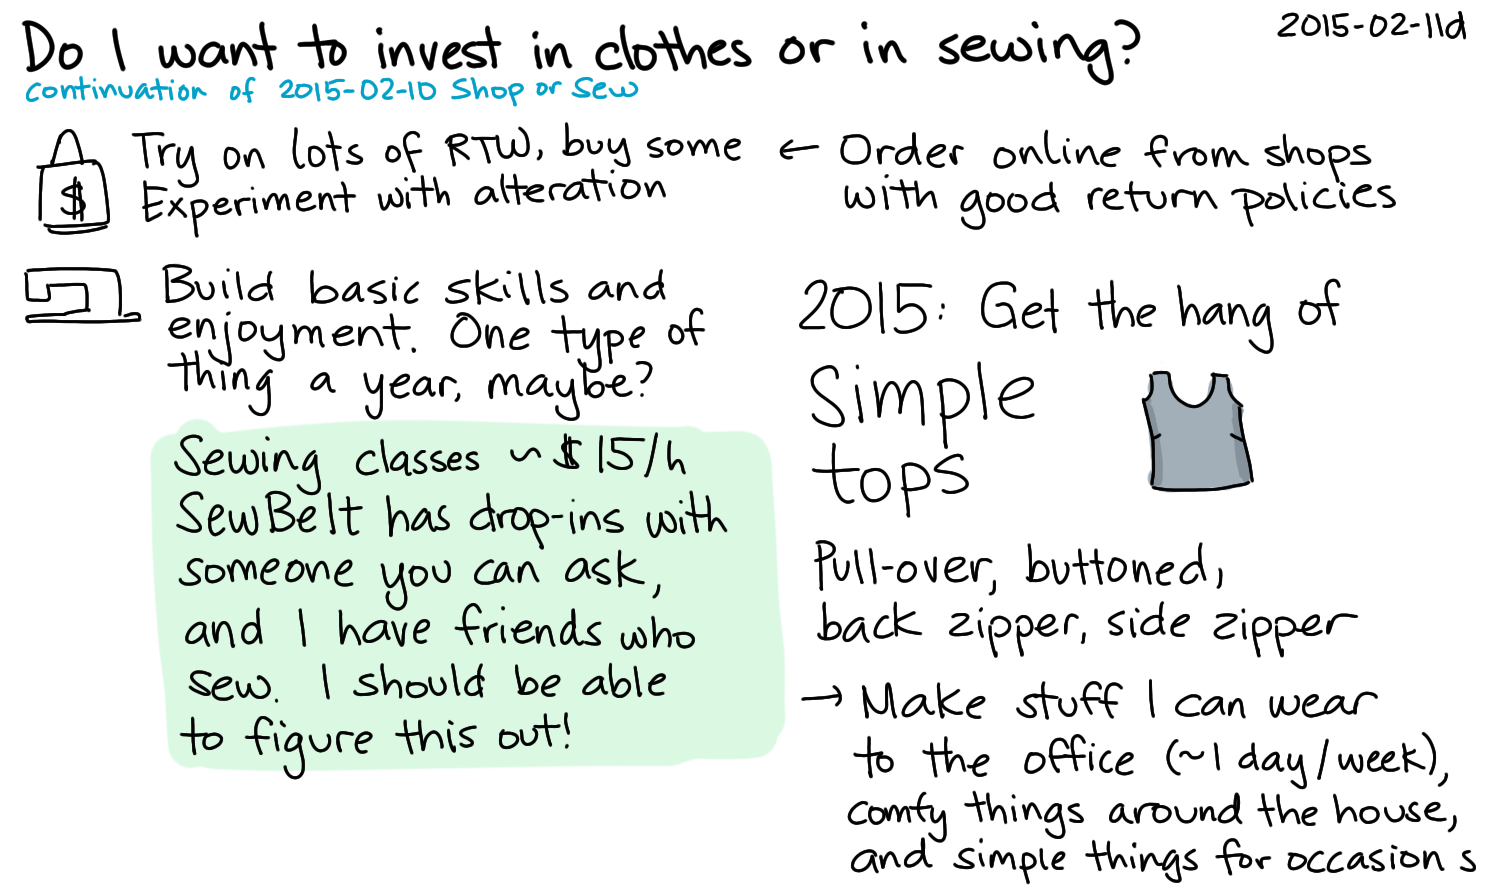 2015-02-11d Do I want to invest in clothes or in sewing -- index card #sewing #clothing -- ref 2015-02-10